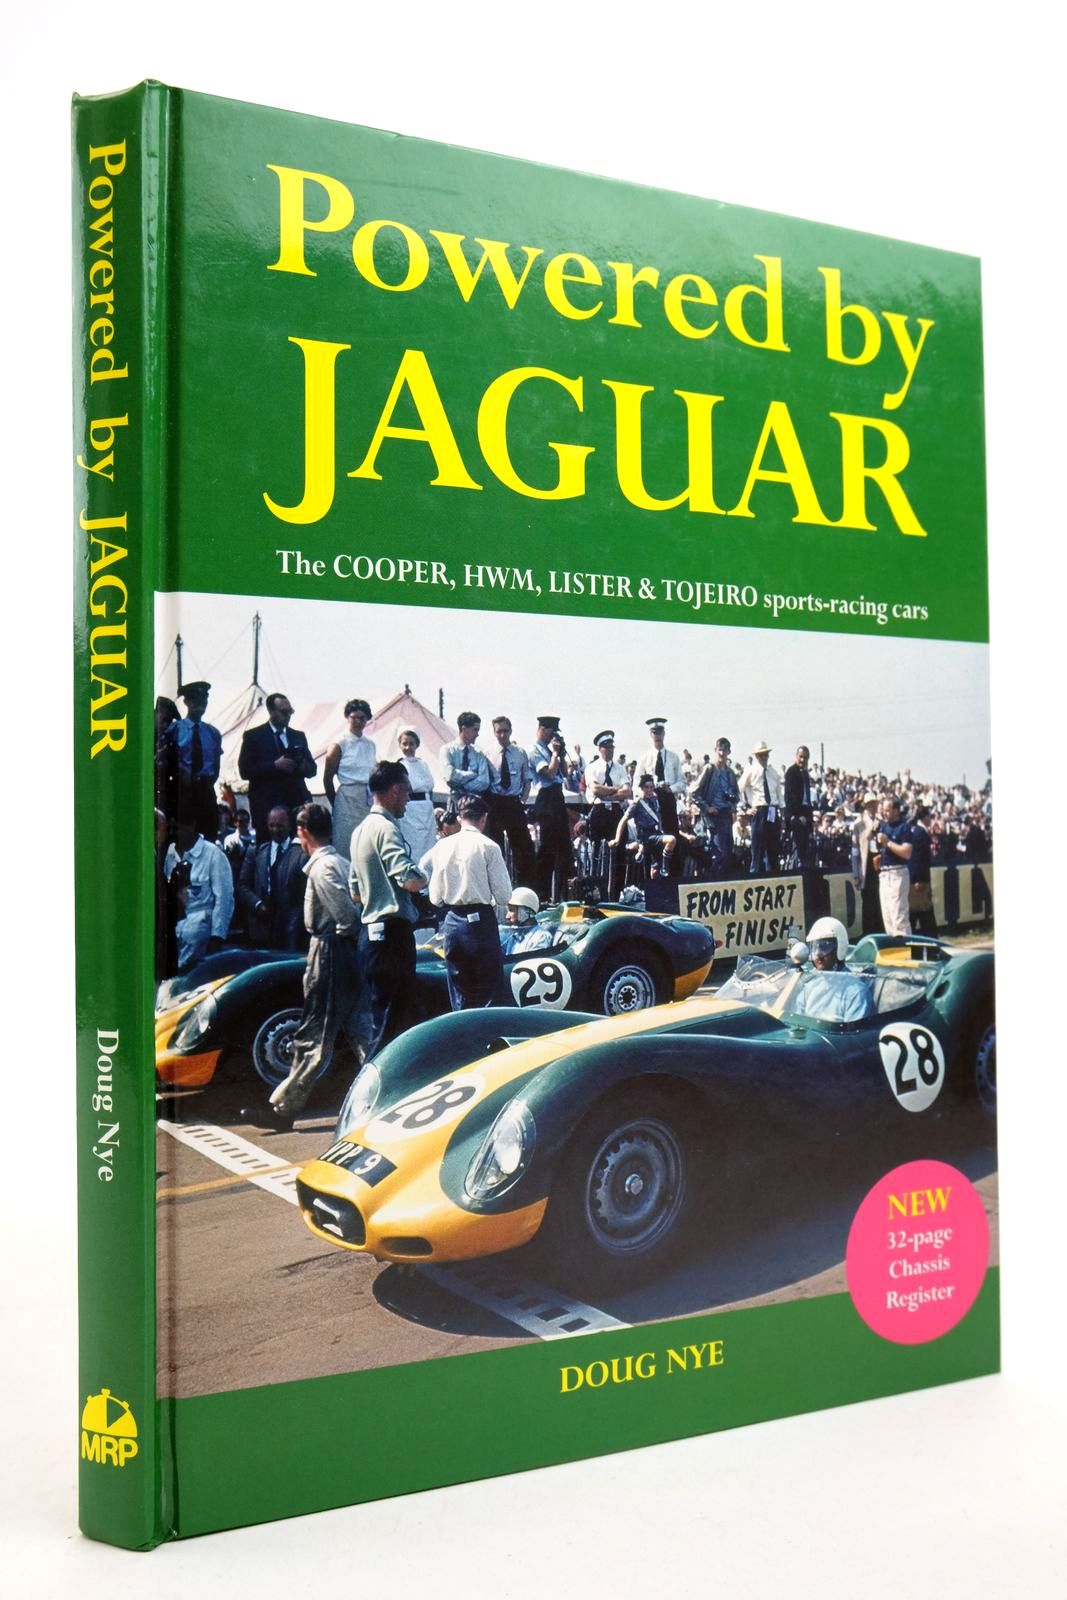 Photo of POWERED BY JAGUAR written by Nye, Doug published by MRP (STOCK CODE: 2140051)  for sale by Stella & Rose's Books